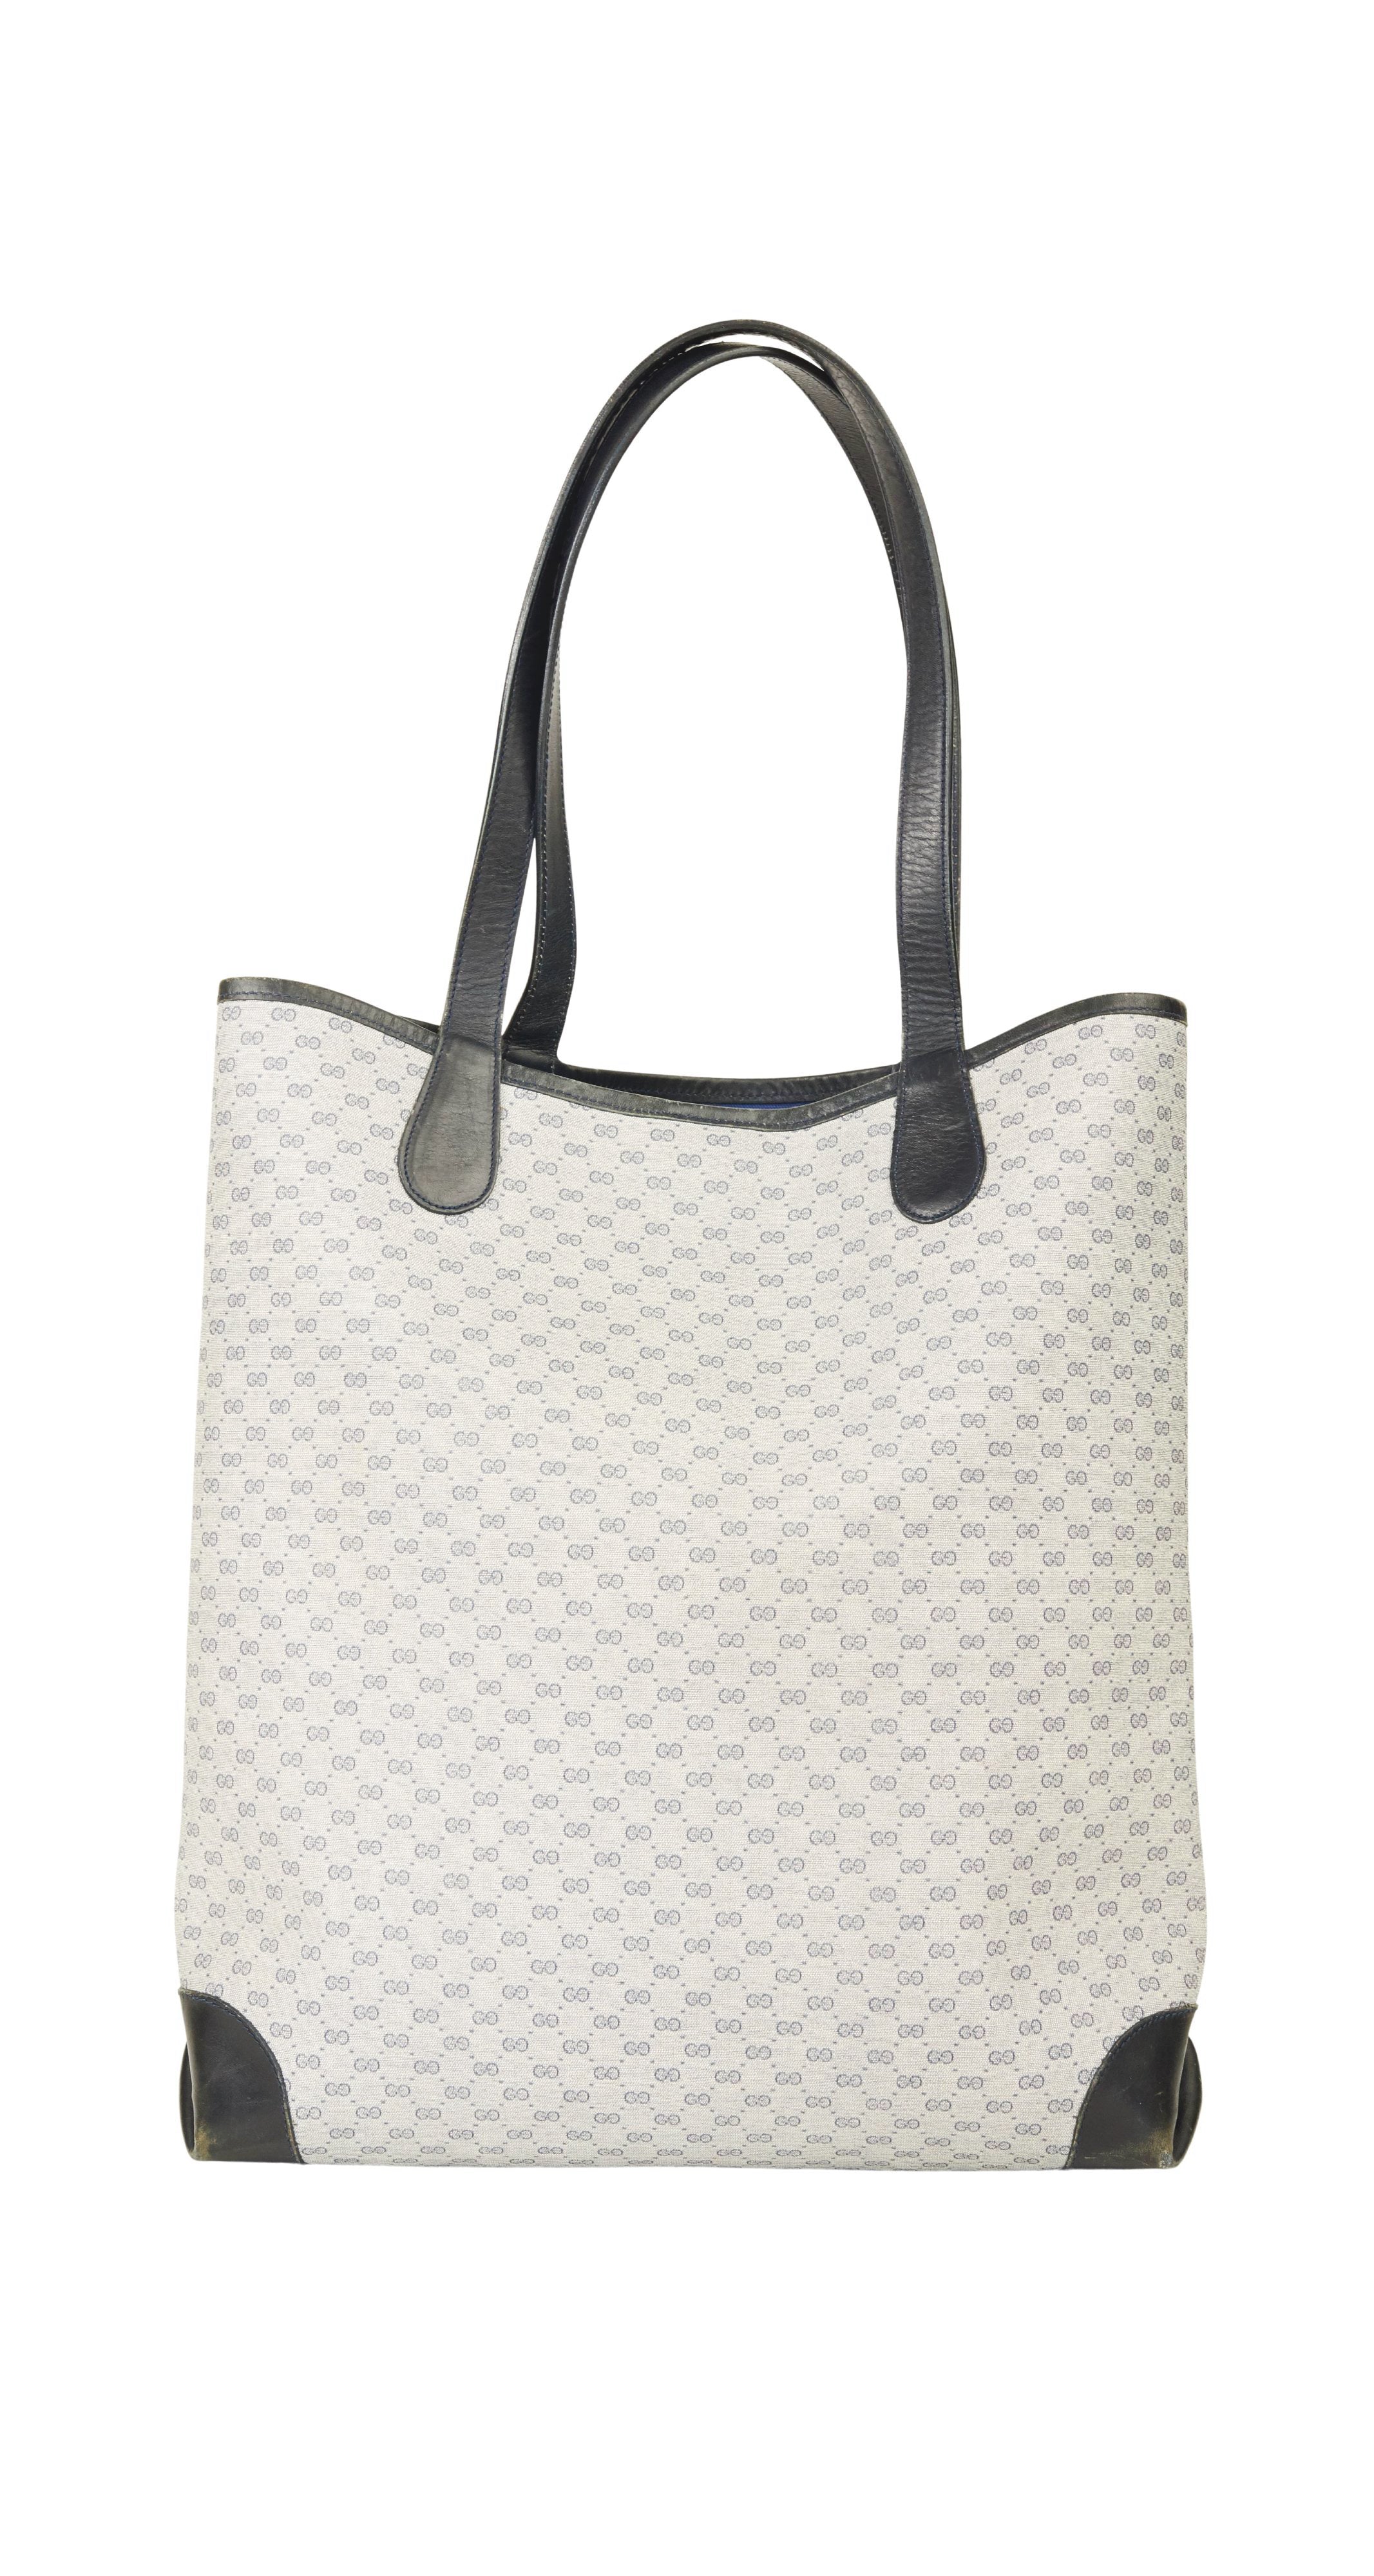 Large Monogram Canvas Tote Bag - Black and White